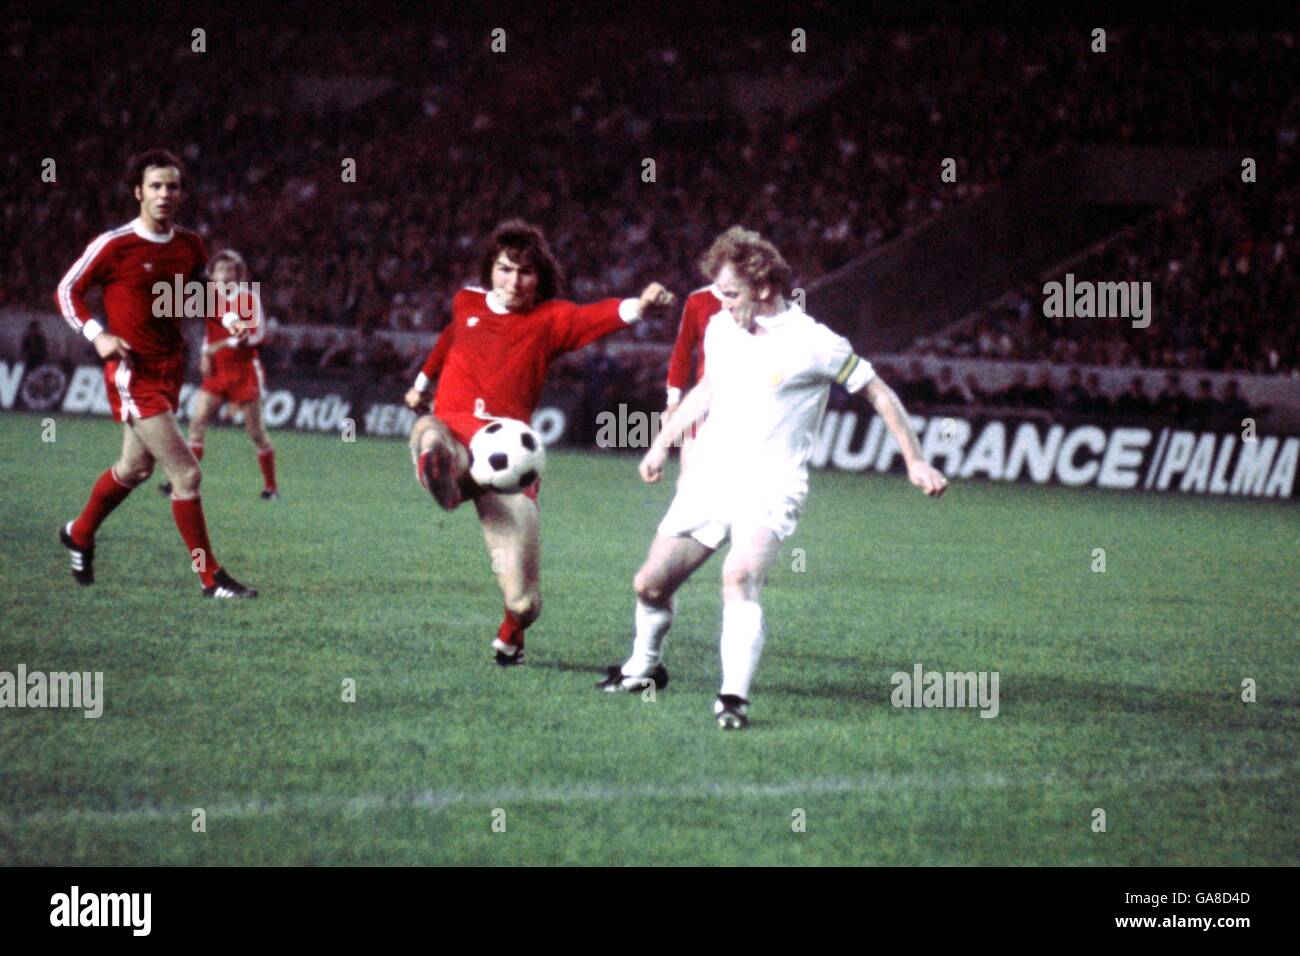 (L-R) Bayern Munich's Franz Beckenbauer looks on as a teammate hooks the ball away from Leeds United's Billy Bremner Stock Photo